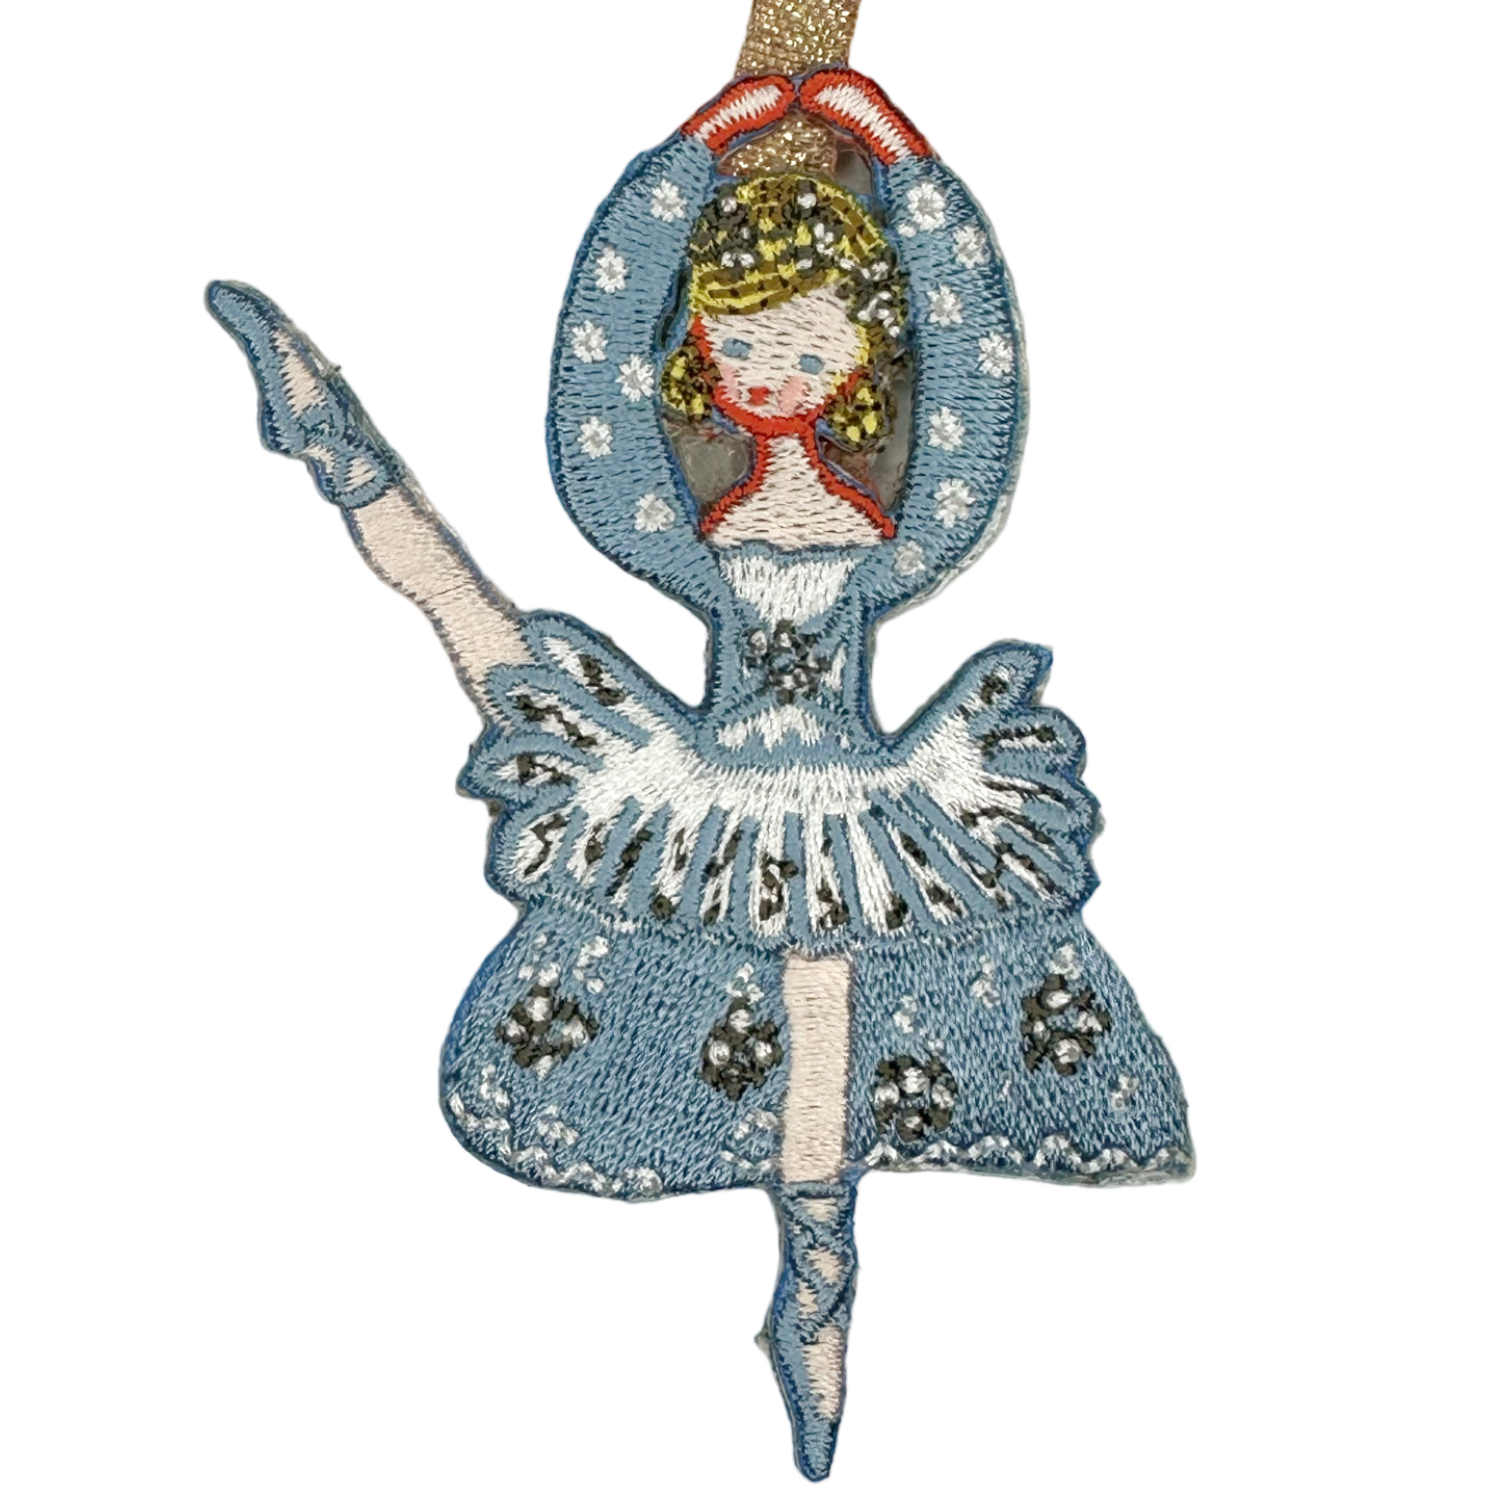 Nutcracker Embroidered Ornament - Christmas Tree - Premium  from Tricia Lowenfield Design 